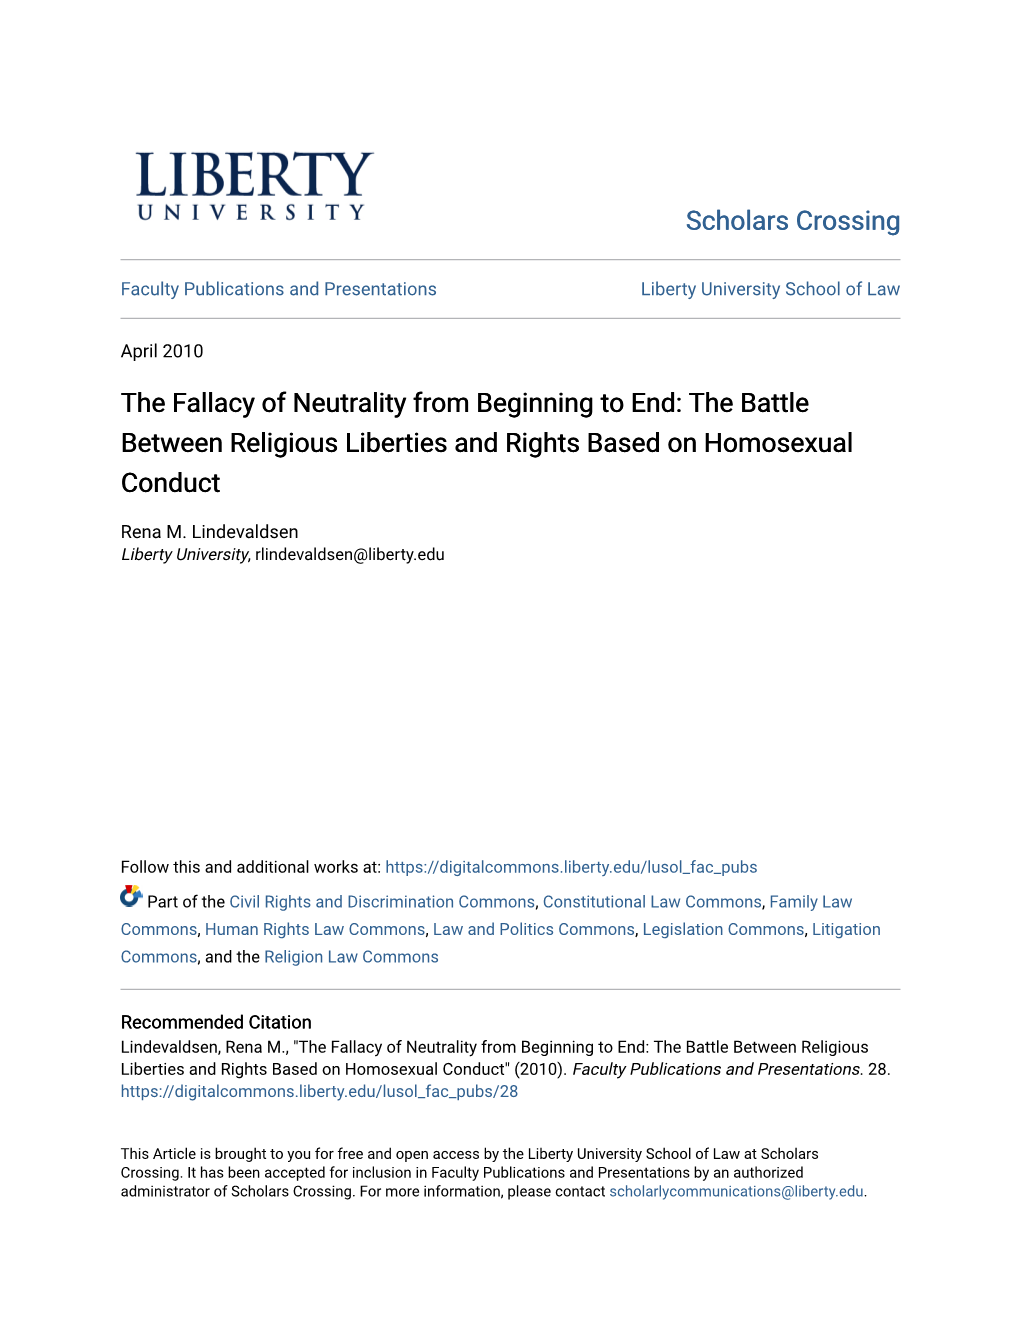 The Fallacy of Neutrality from Beginning to End: the Battle Between Religious Liberties and Rights Based on Homosexual Conduct